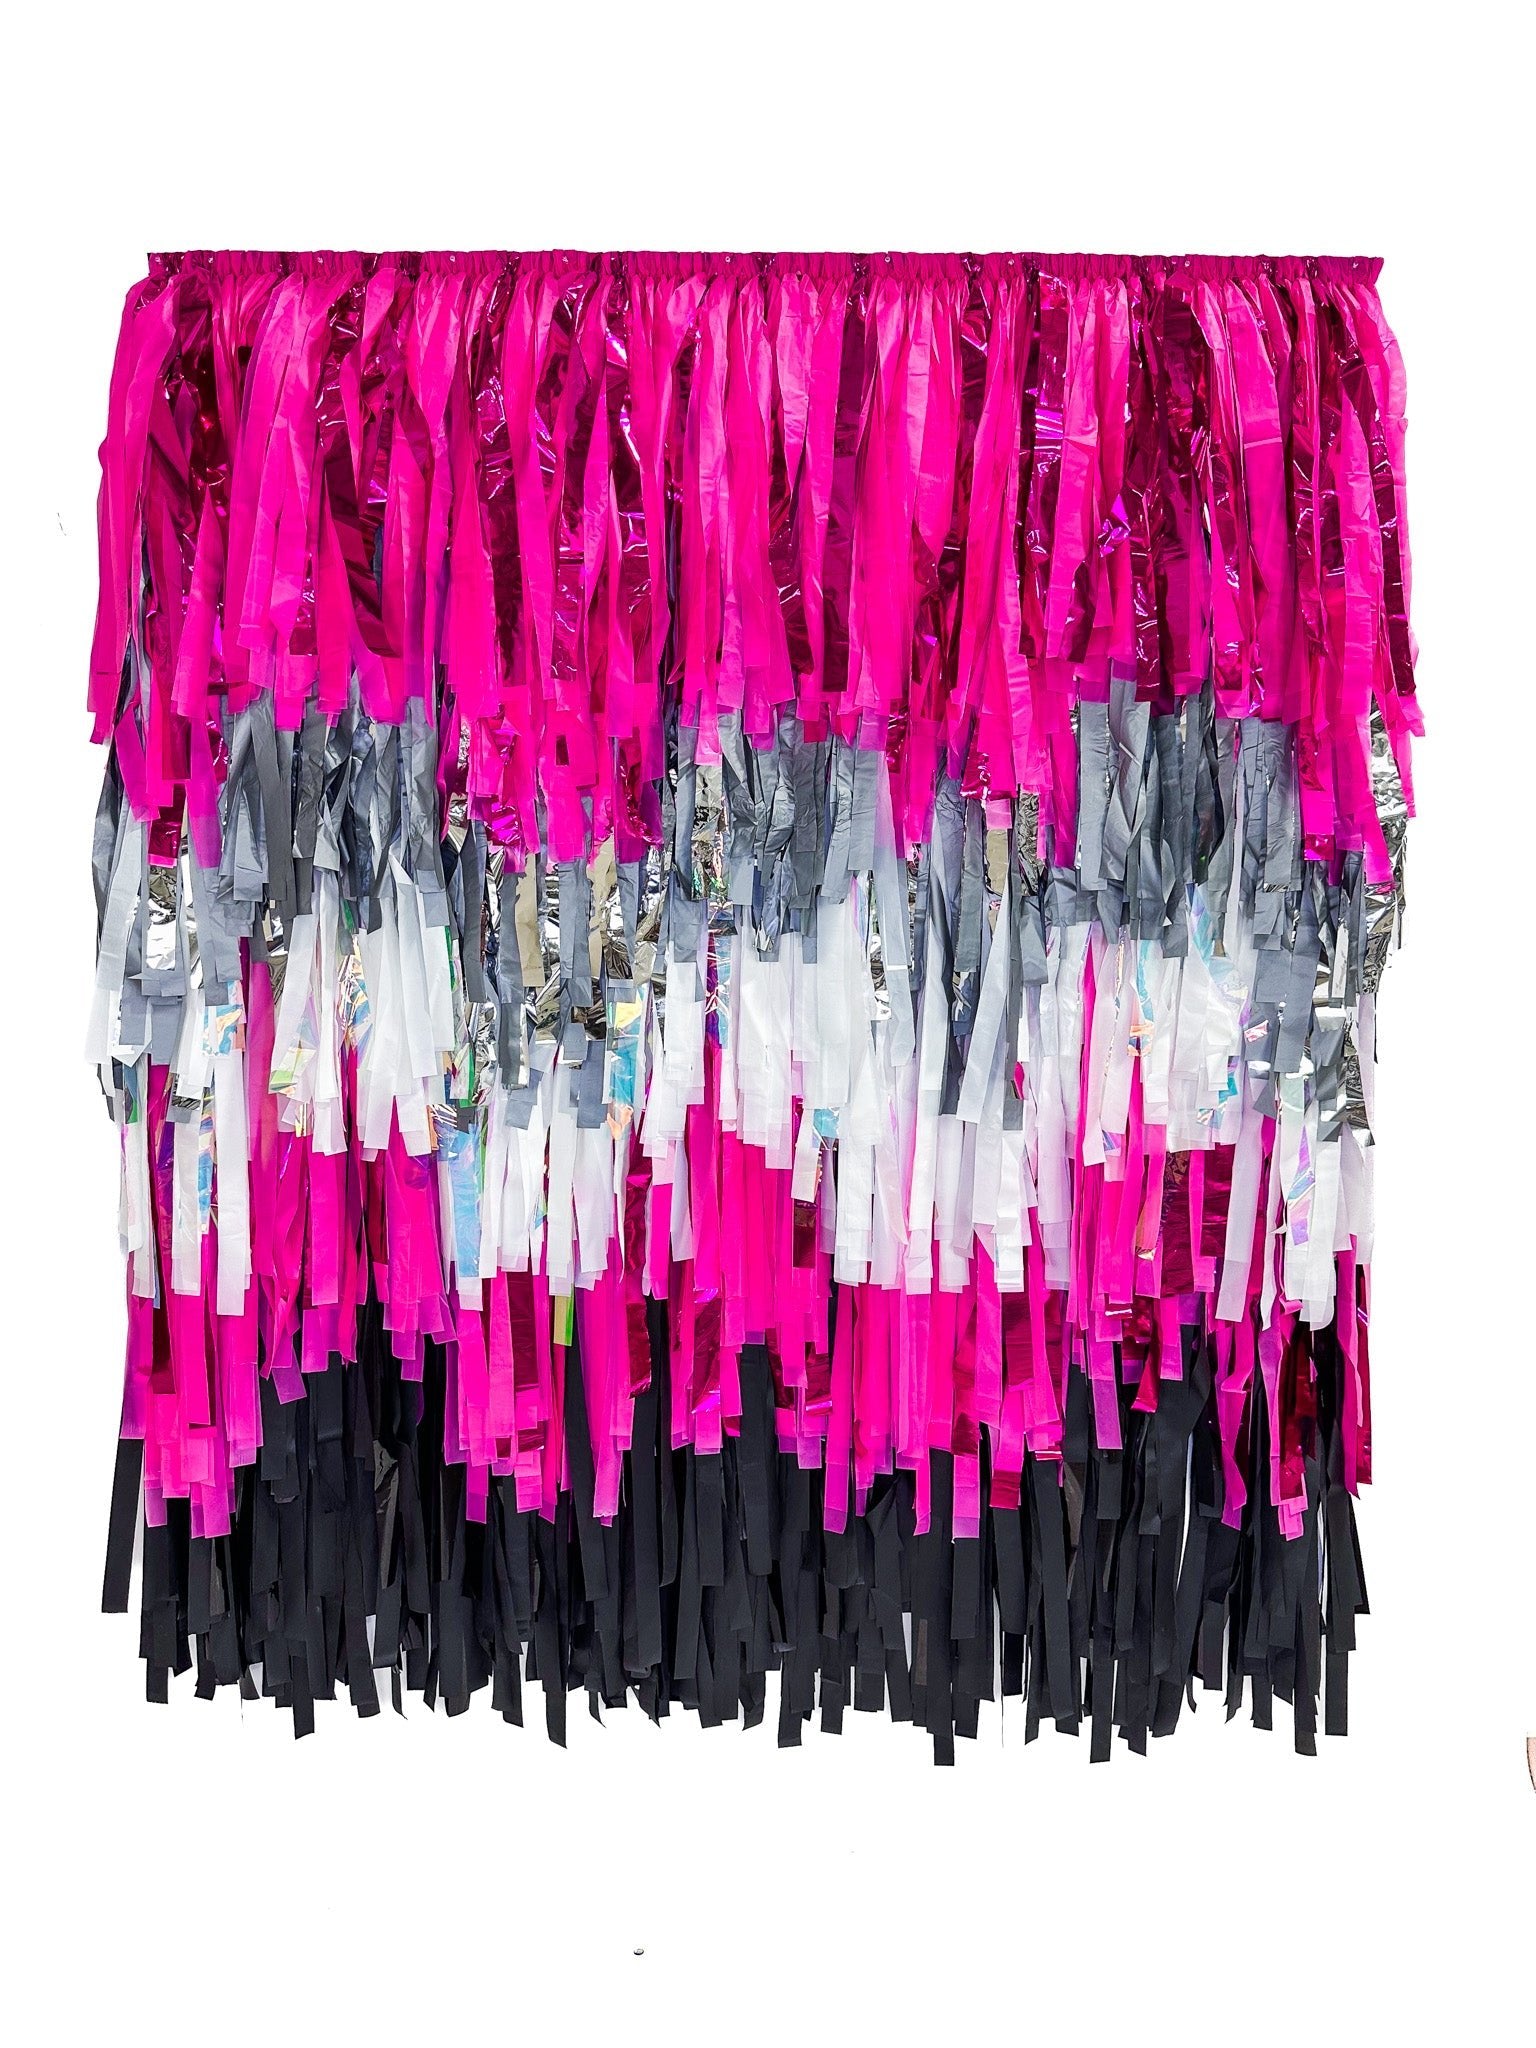 All That Glitters Fringe Backdrop - Oh My Darling Party Co-25th anniversary50th party decoranniversary decor #Fringe_Backdrop#